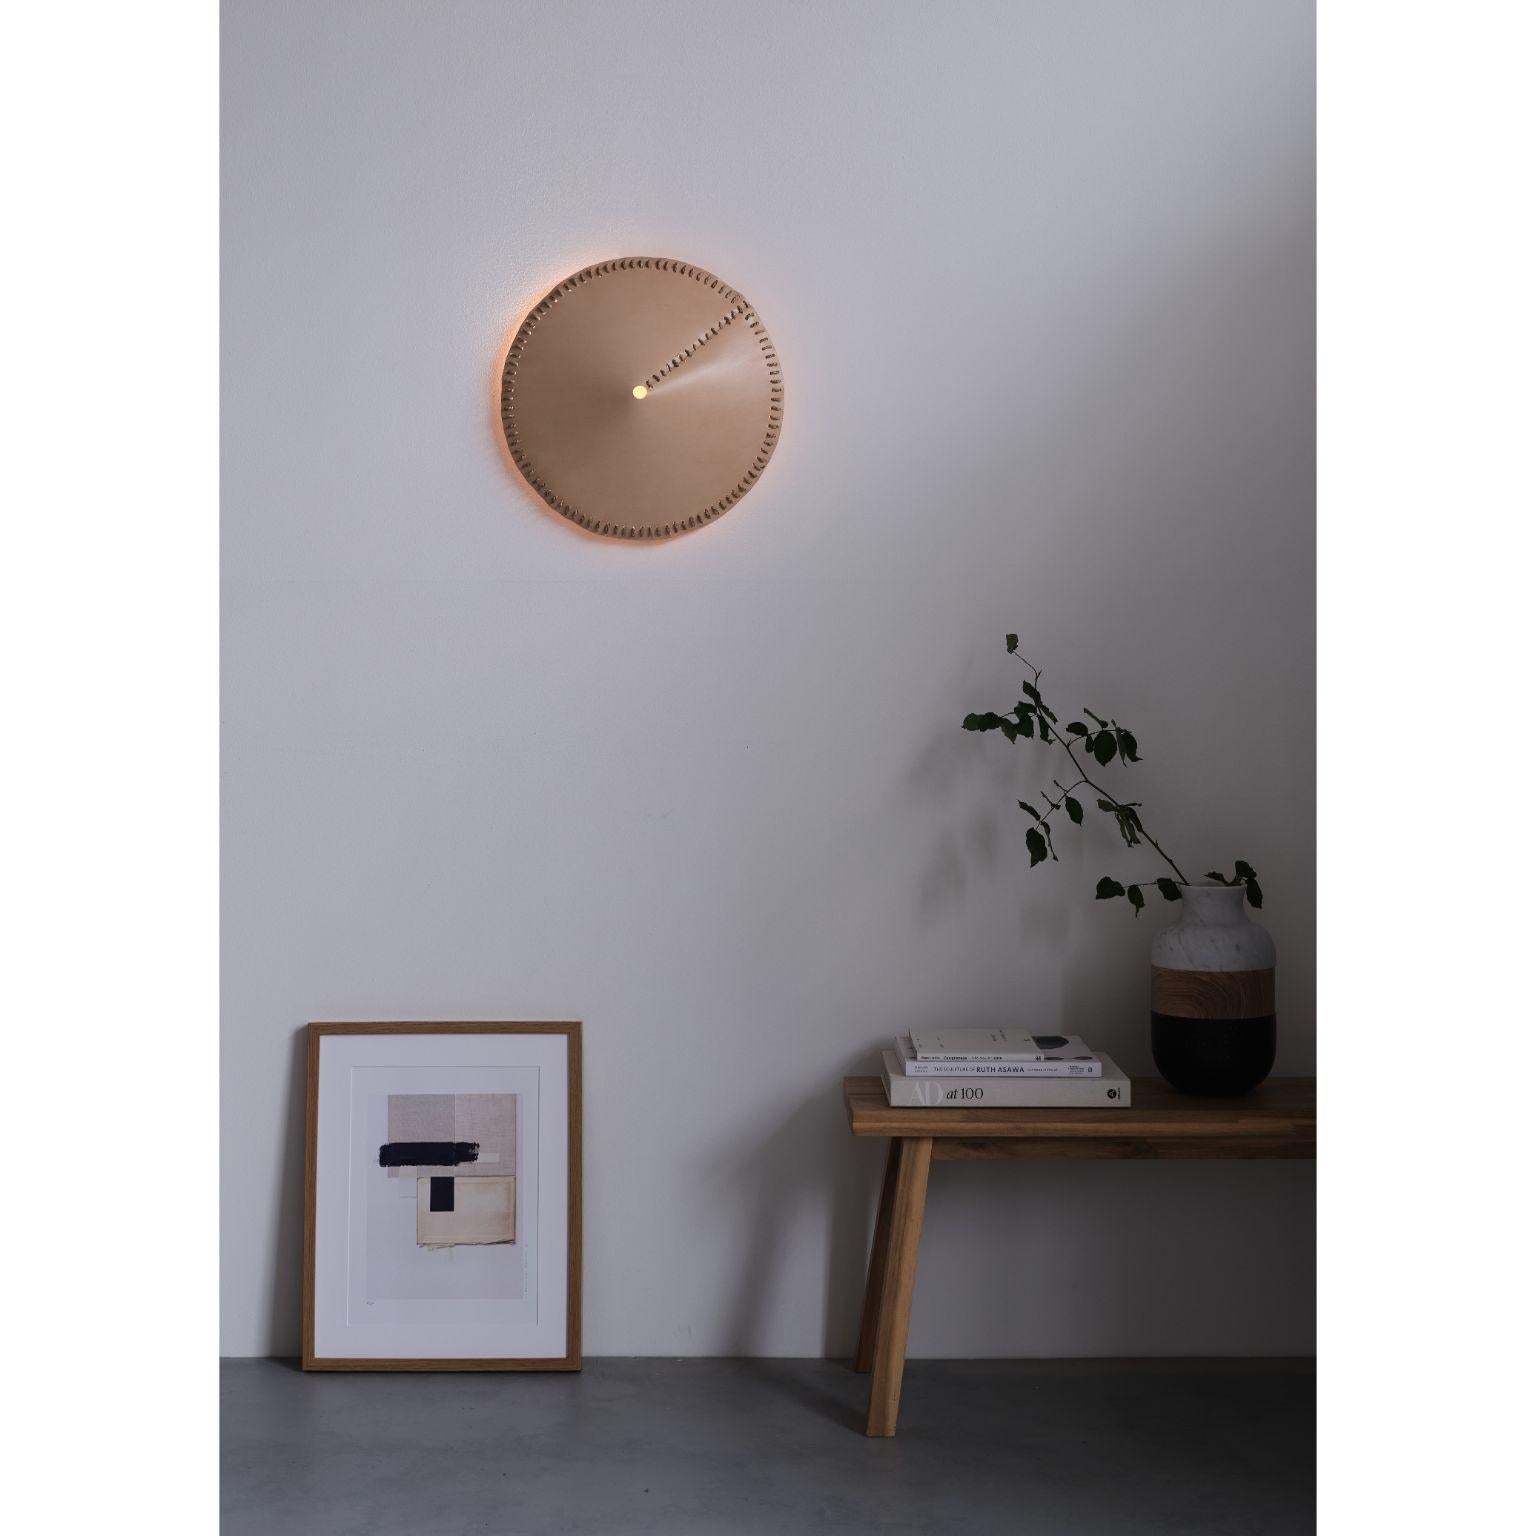 Alp wall light 335 by Alp Design
Designer: Annick L Petersen.
Dimensions: Ø 42 x H 8 cm.
Material: natural tan leather stitched with sea grass cord.

All our lamps can be wired according to each country. If sold to the USA it will be wired for